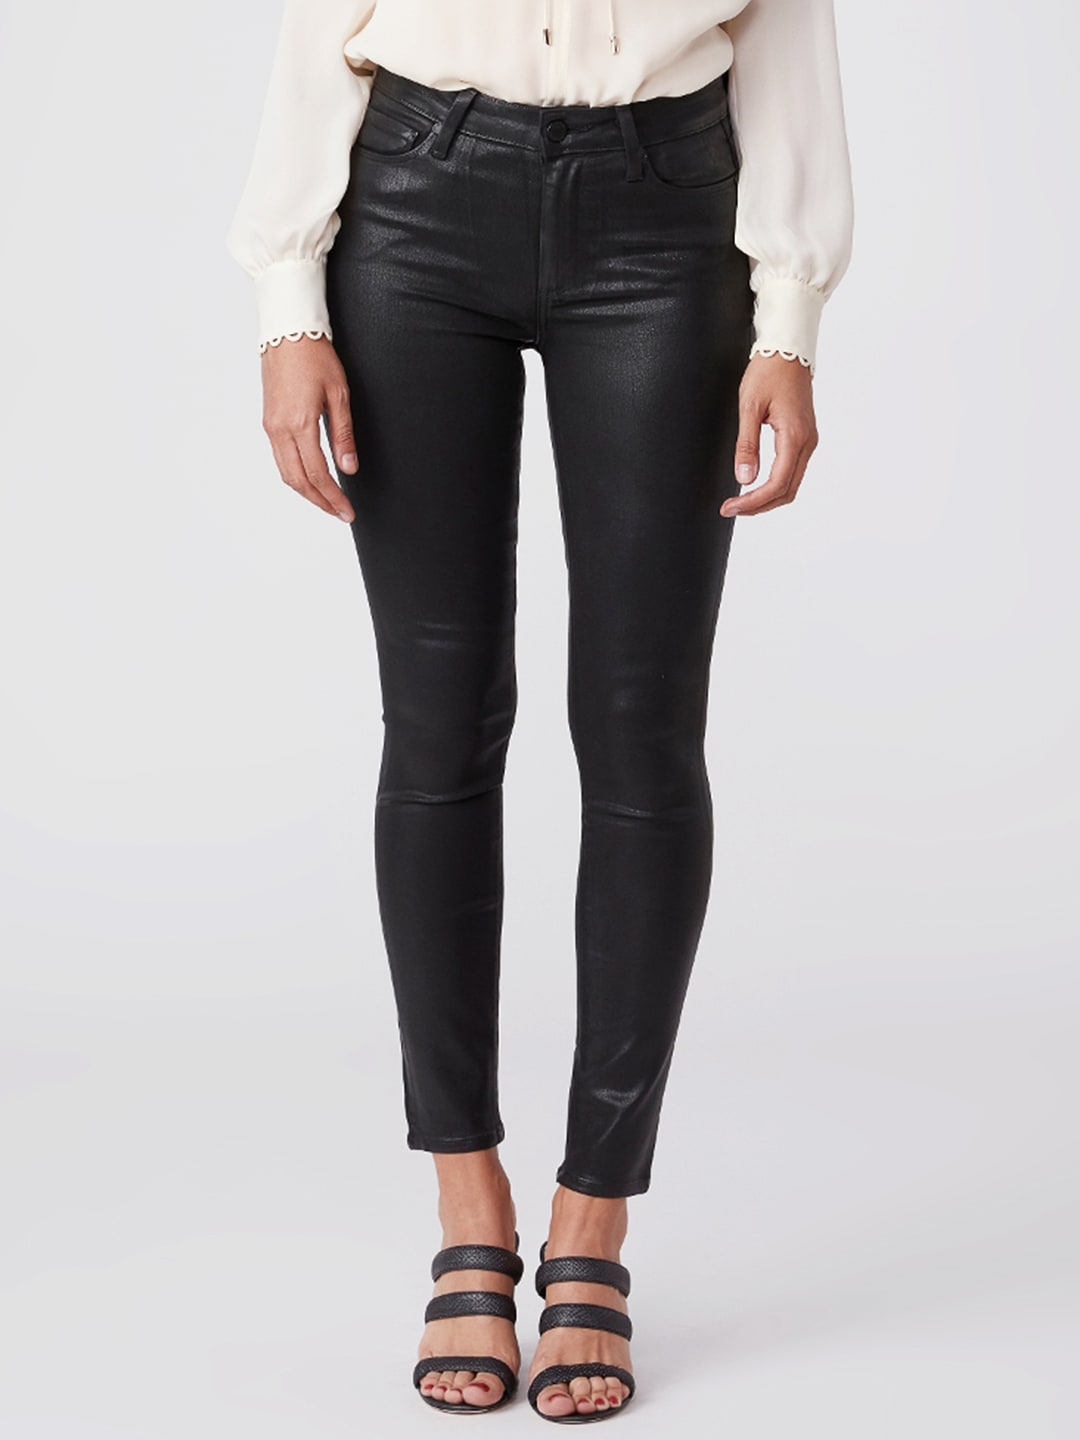 Paige Hoxton Skinny Jeans